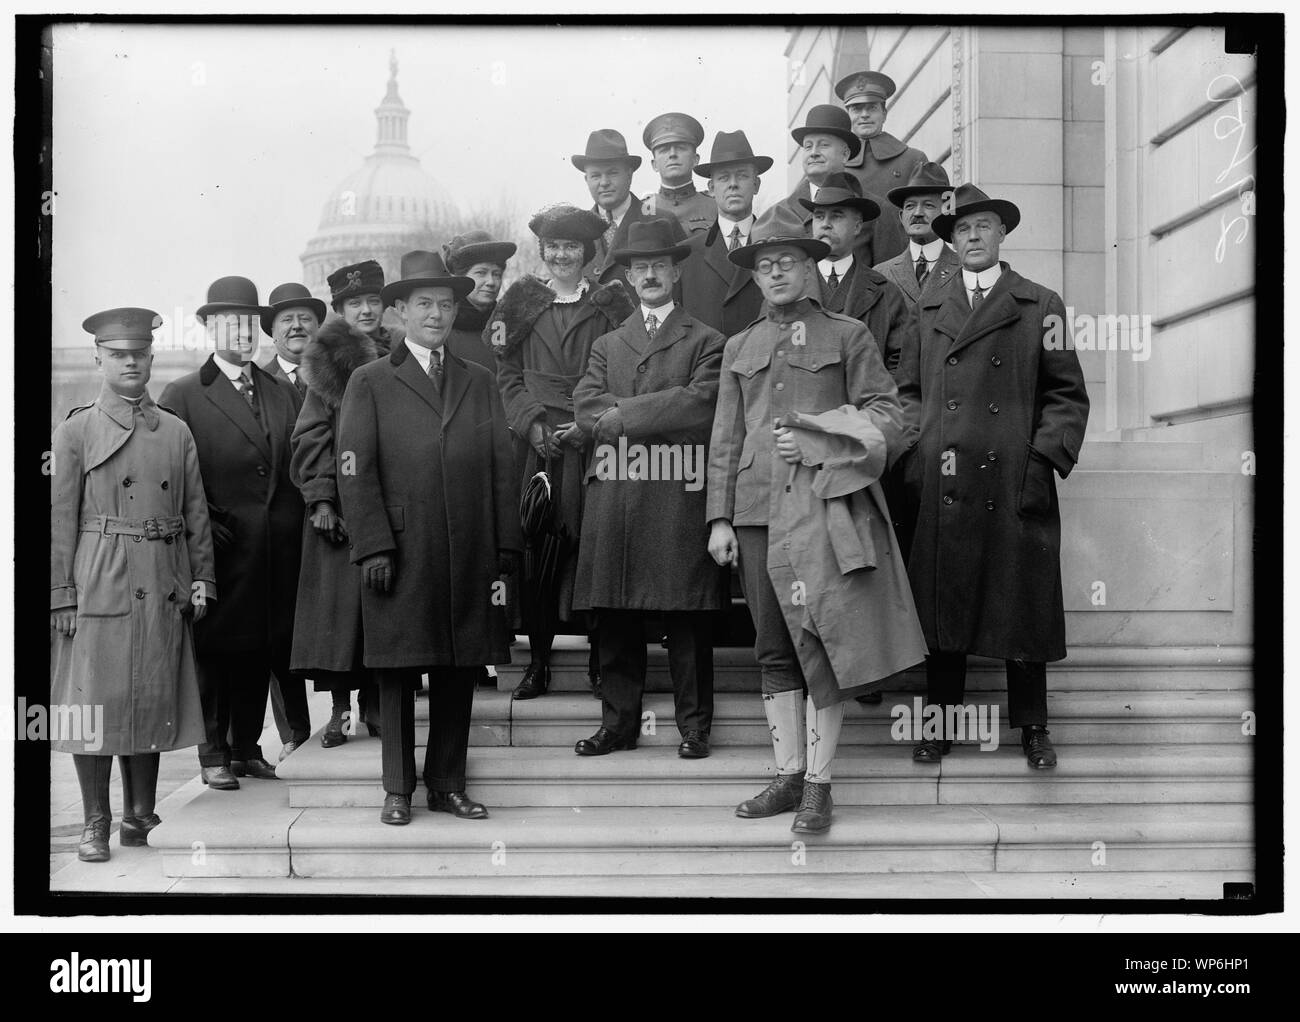 LINN, SGT. W.A. RIGHT FRONT; WITH REP. J. HAMPTON MOORE, CENTER; GEORGE O'CONNOR, LEFT CENTER FRONT; AND OTHERS ON STEPS OF H.O.B. Stock Photo